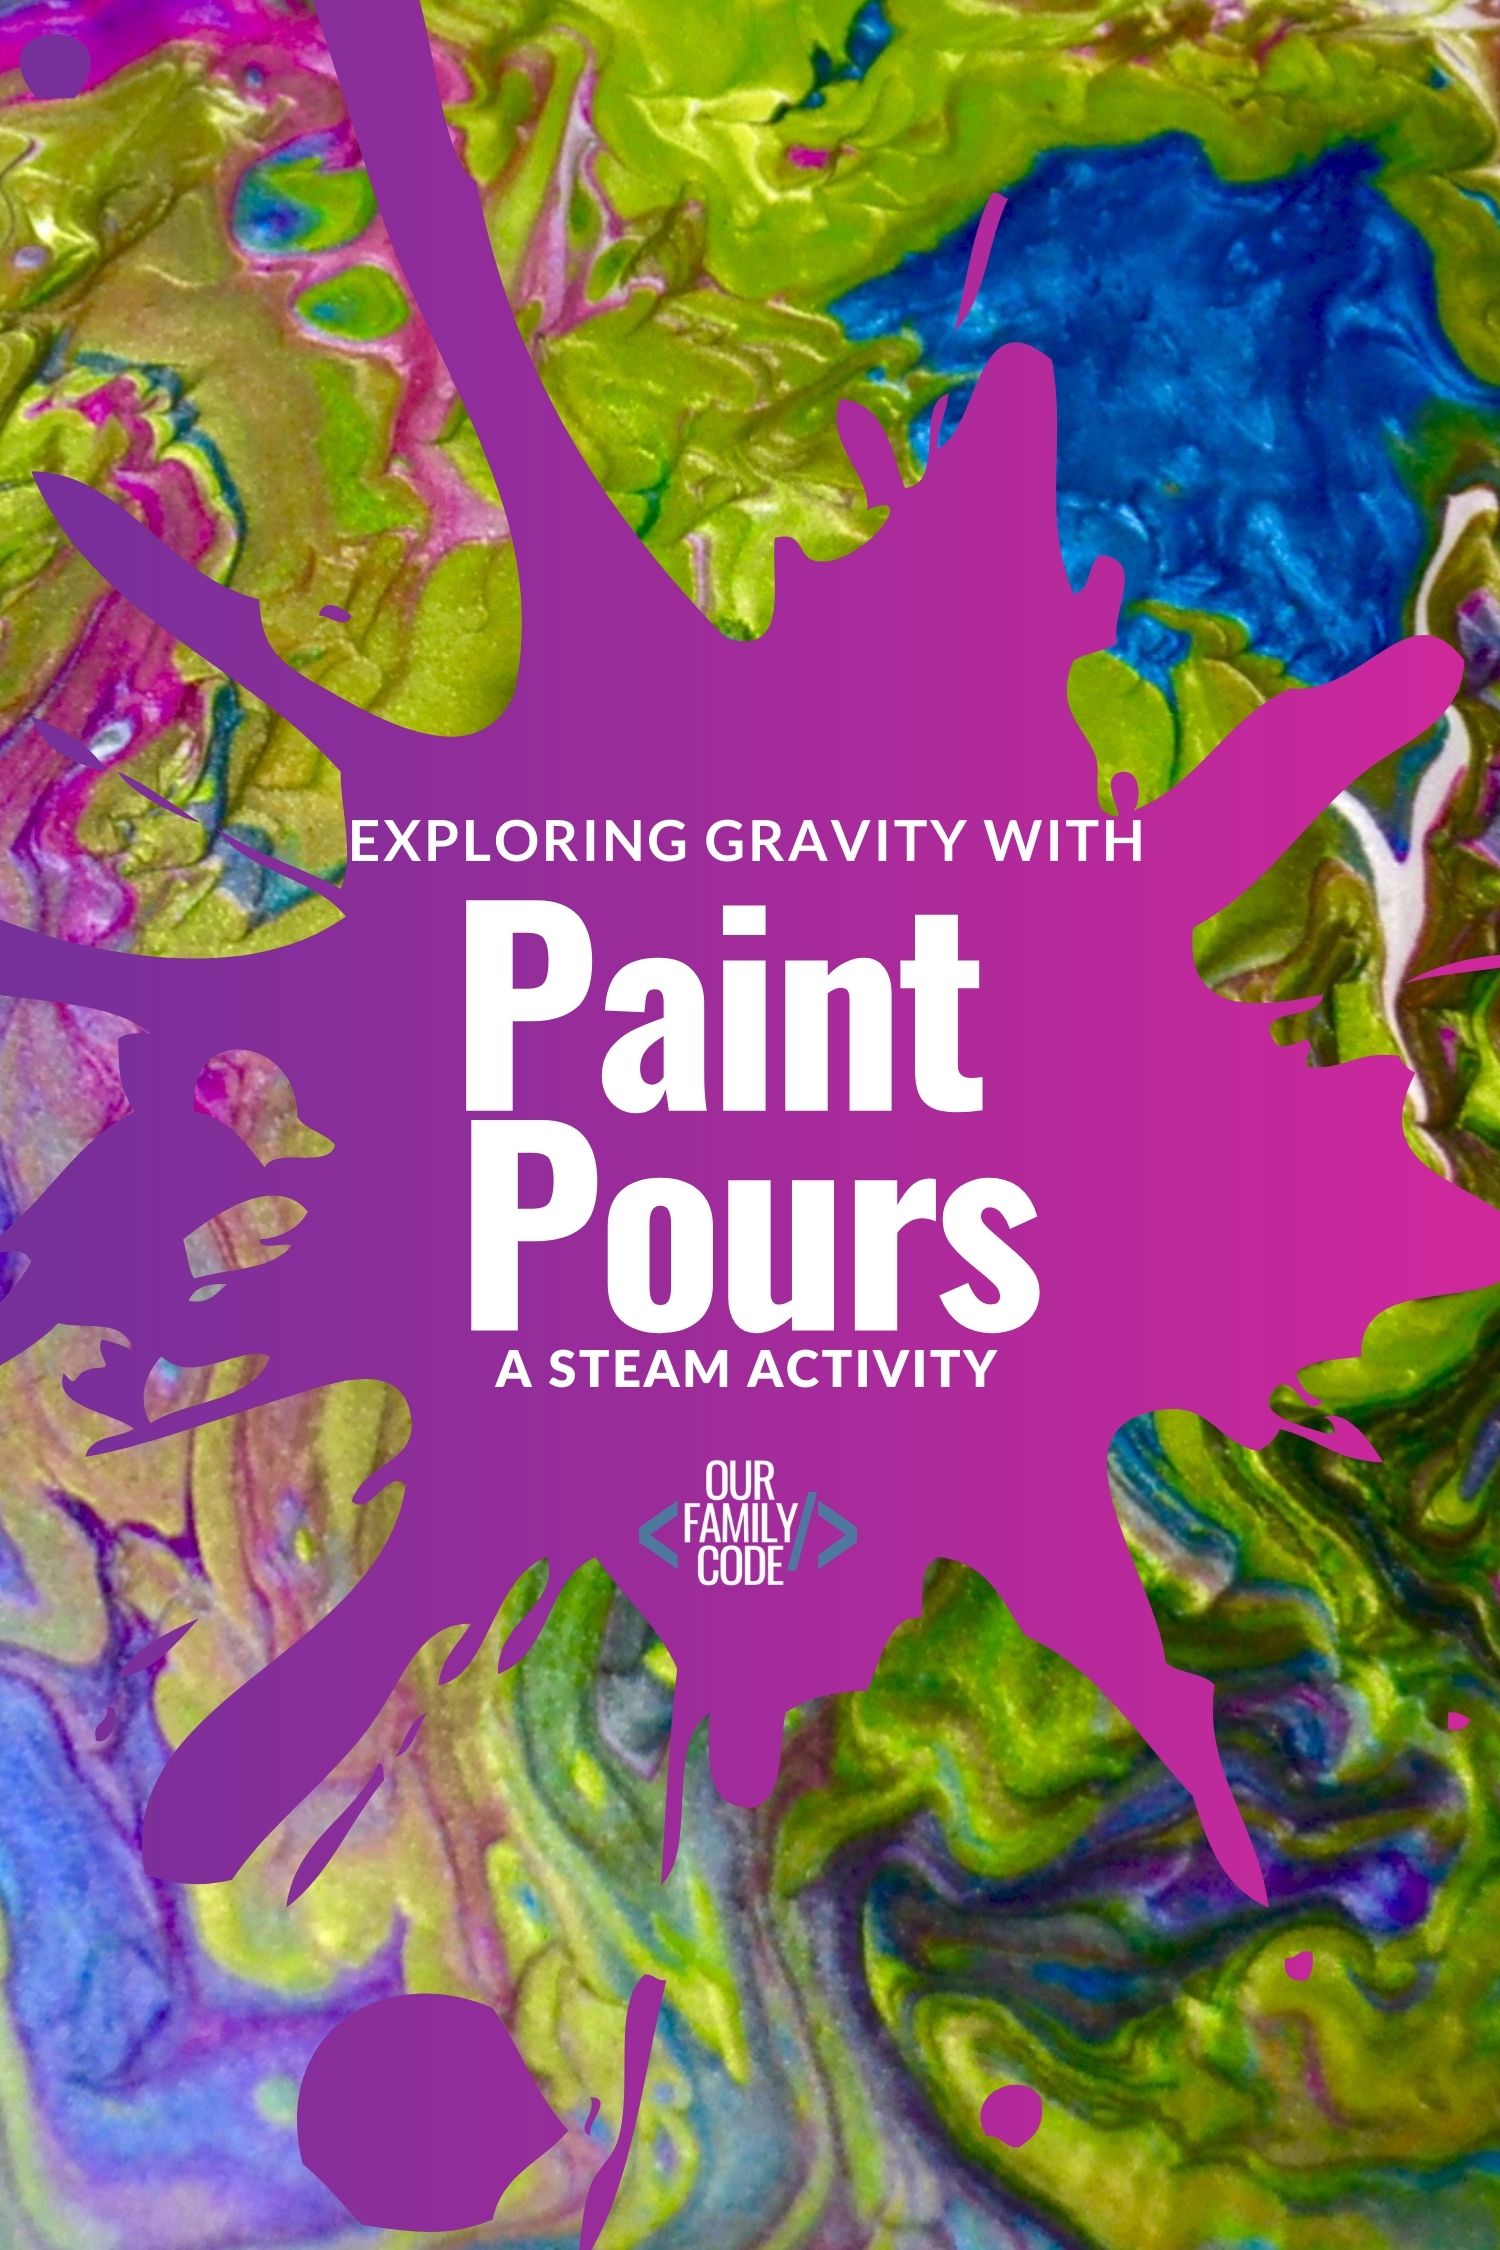 Gravity makes some of the most interesting art! Learn about gravity with paint pours and make awesome marbleized patterns with kids today! #ourfamilycode #STEAM #paintpour #artprojects #STEM #kidcrafts #gravitylesson #scienceforkids #STEAMkids